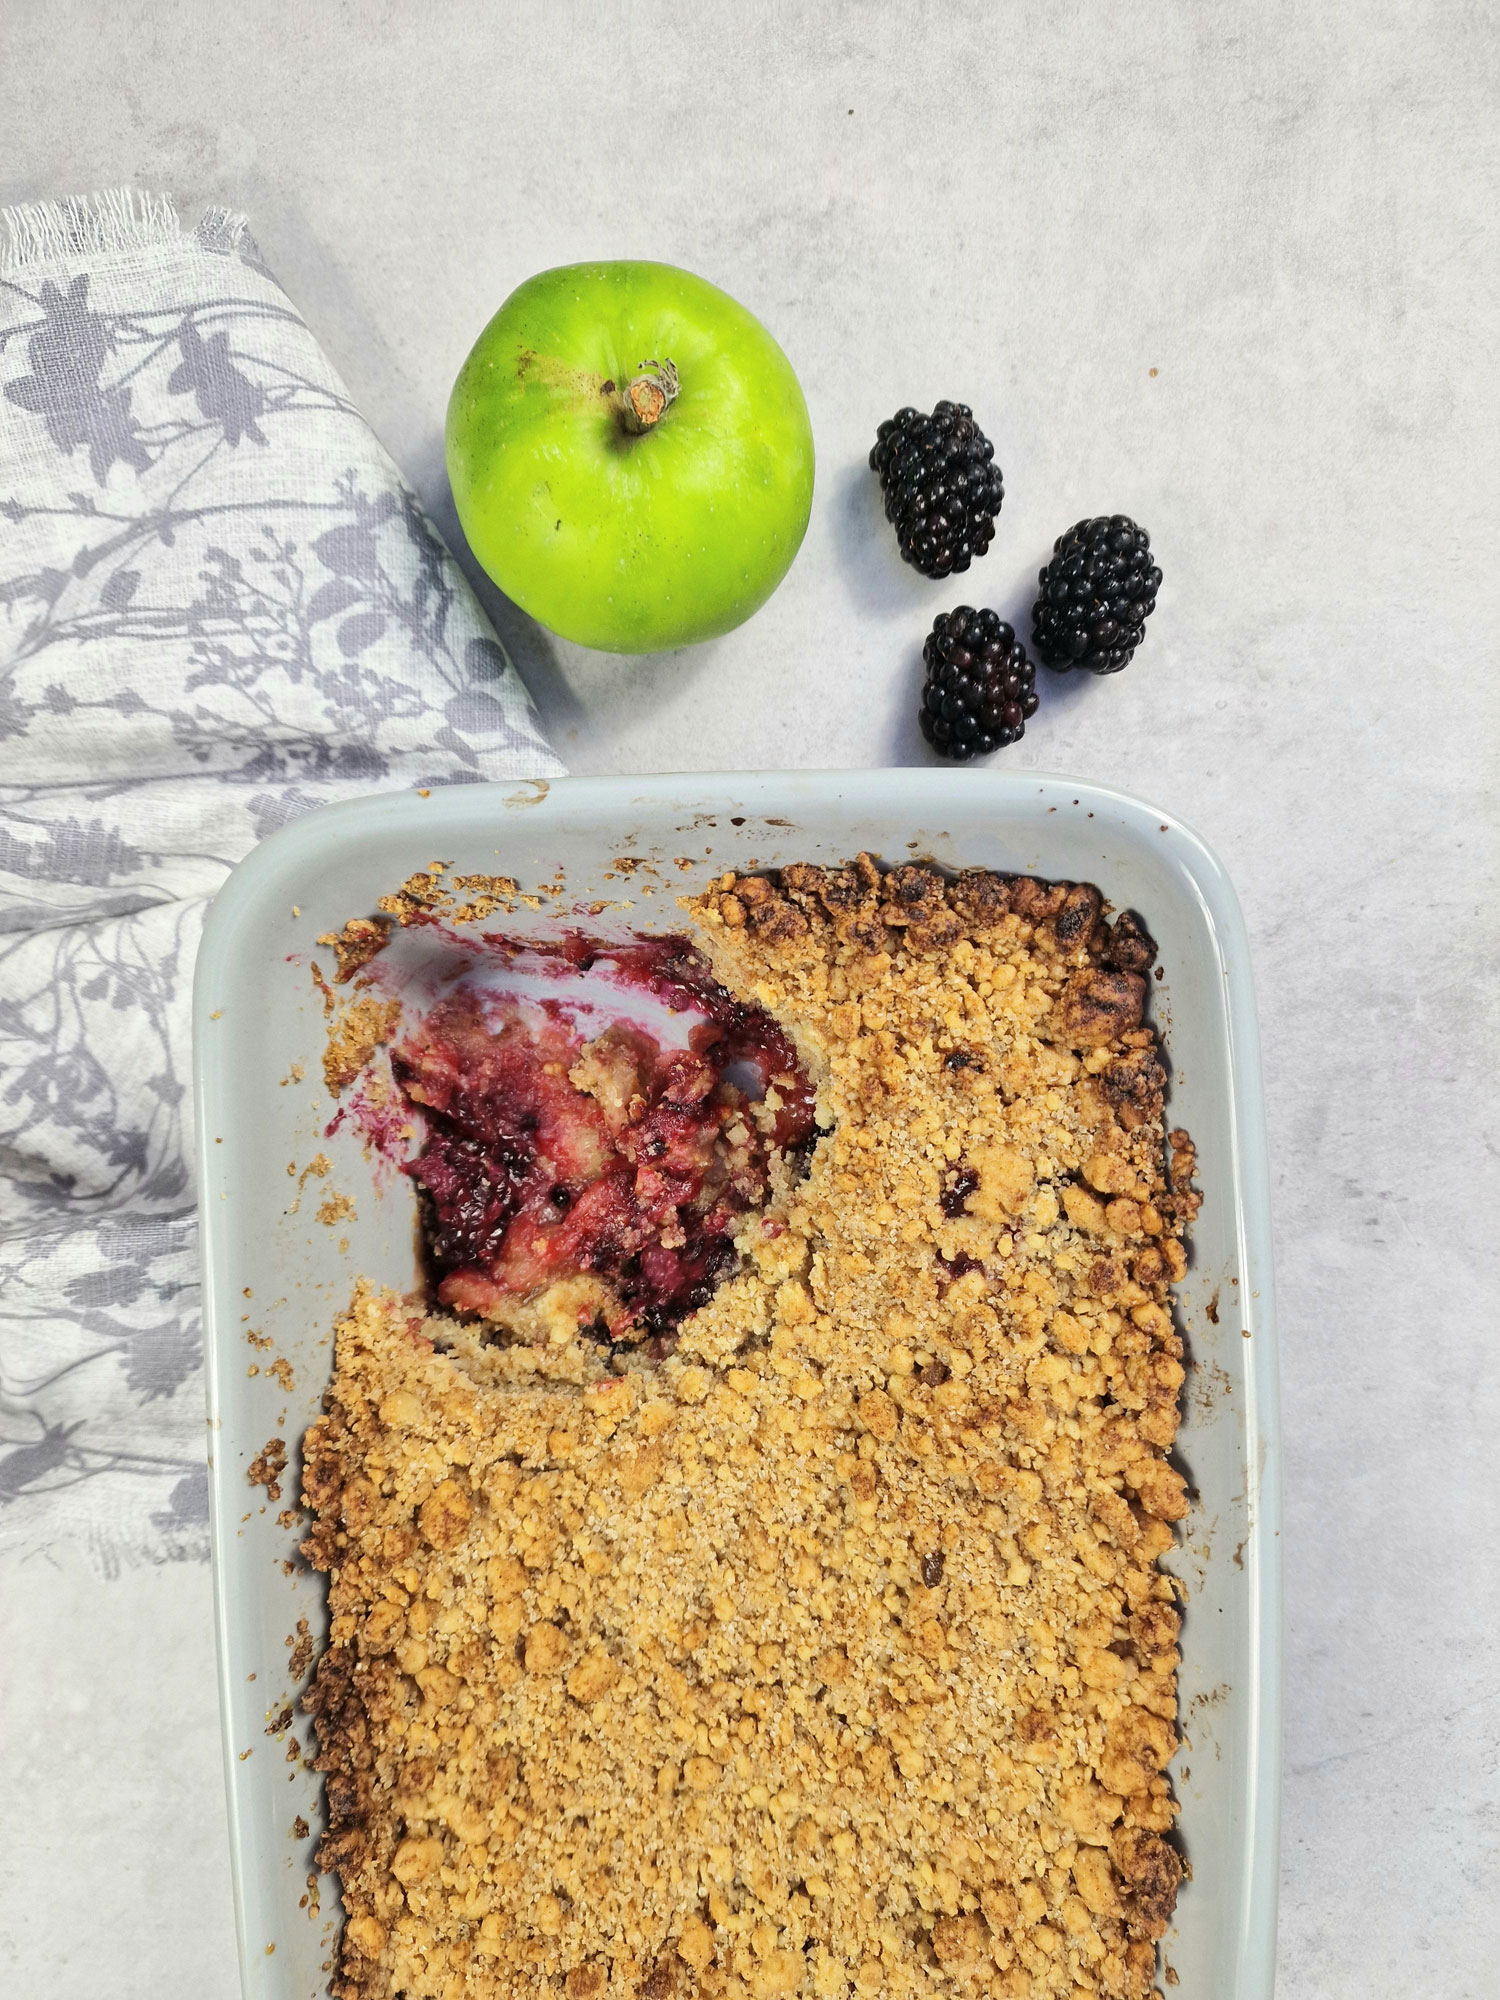 apple and blackberry crumble with bramley apple and blackberry next to it